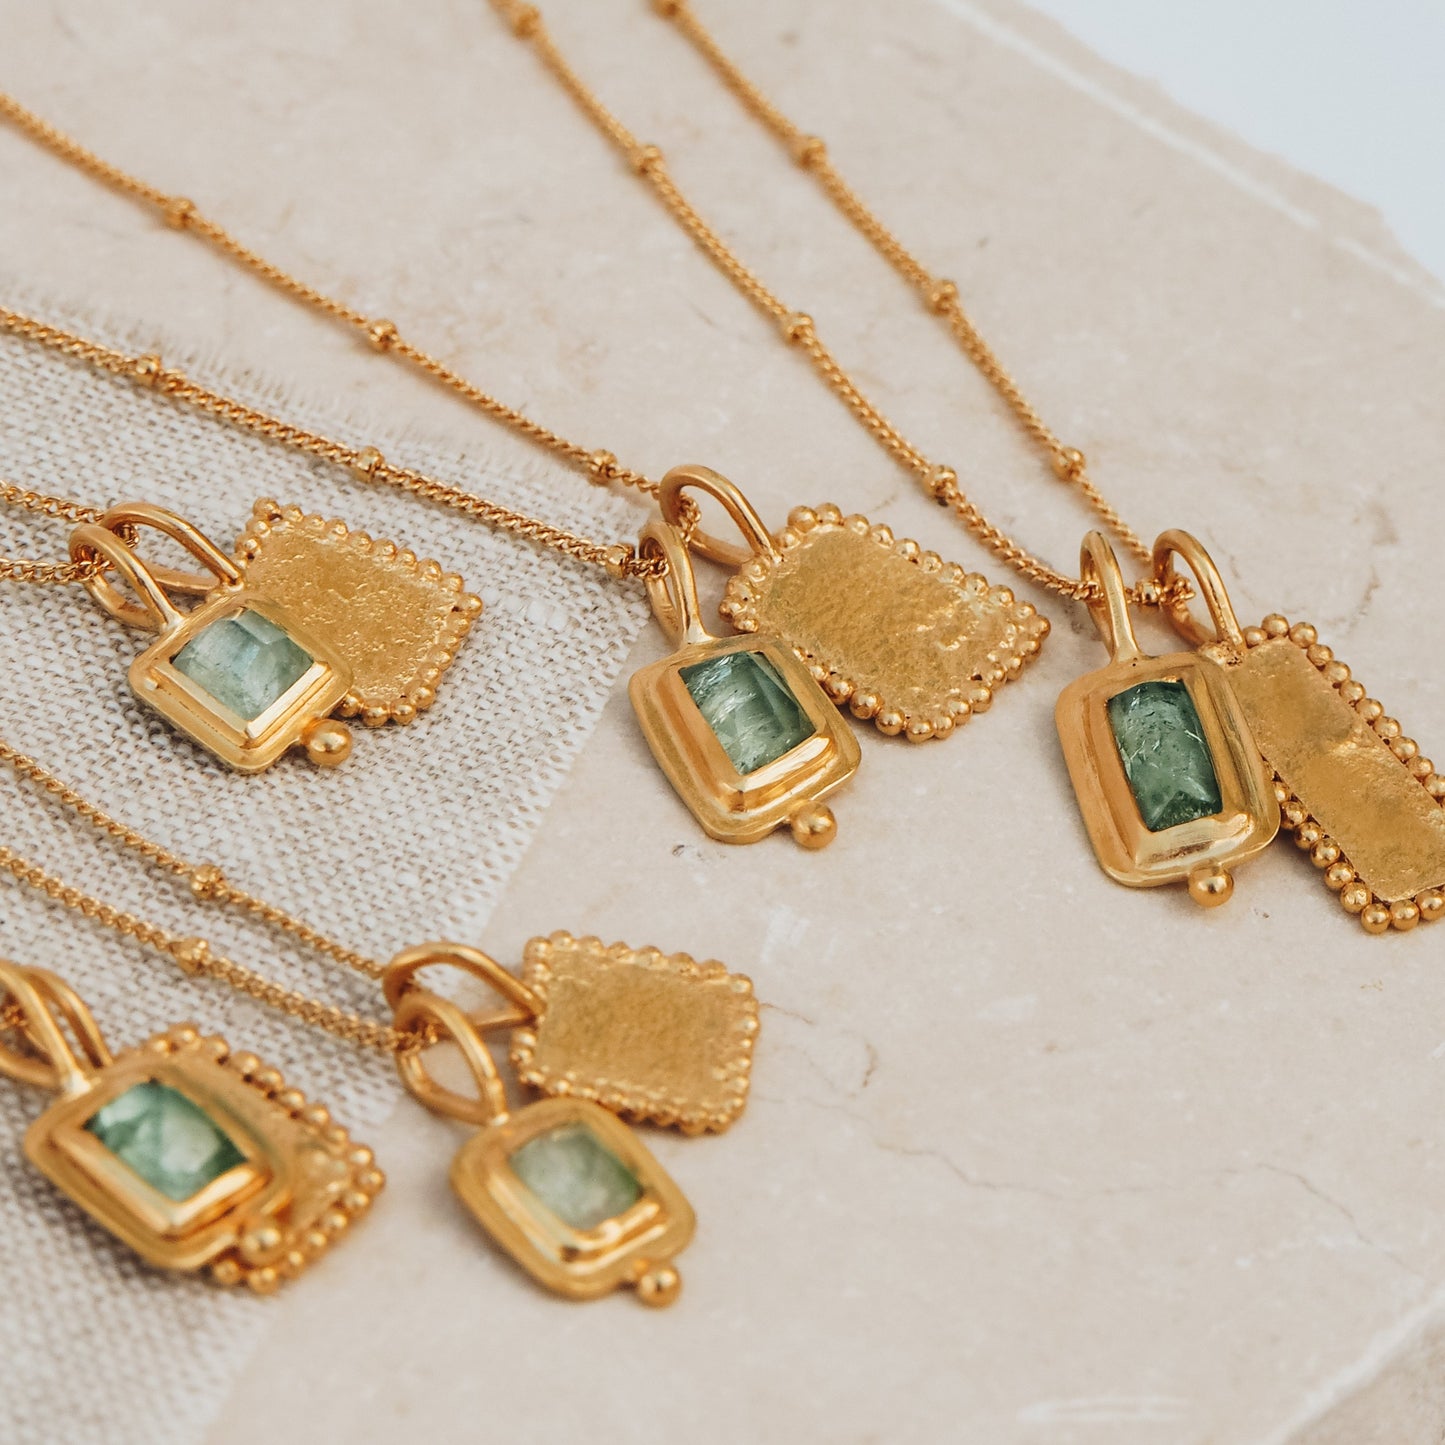 A collection of granulated pendants with blue tourmaline gemstones